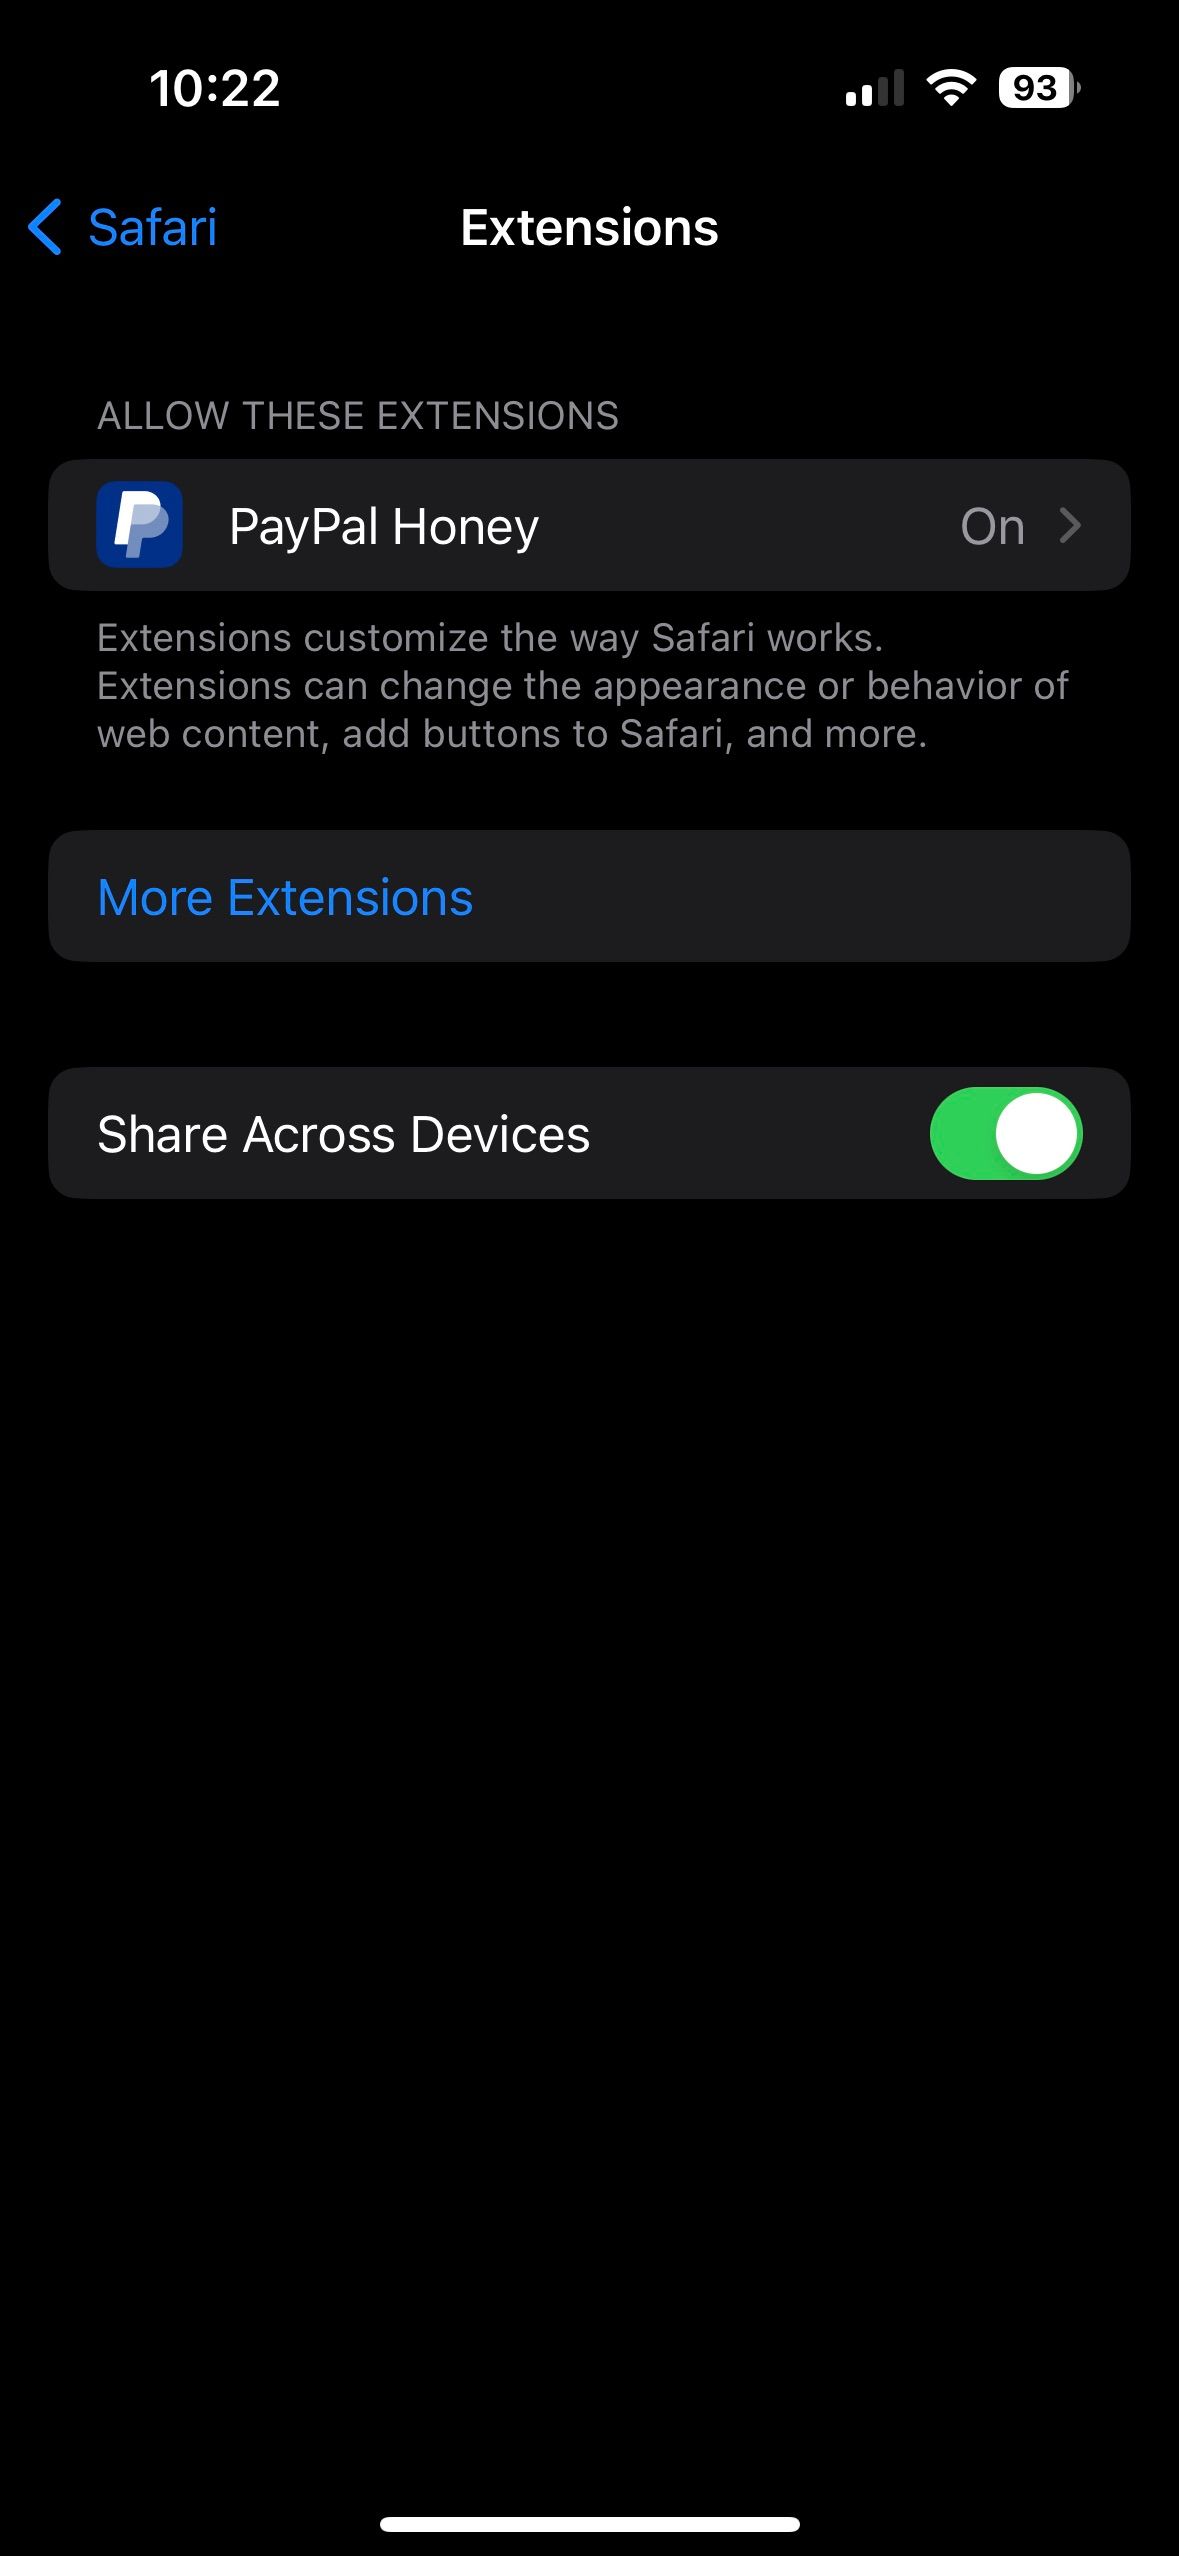 Screen showing available extensions in Settings app on iPhone